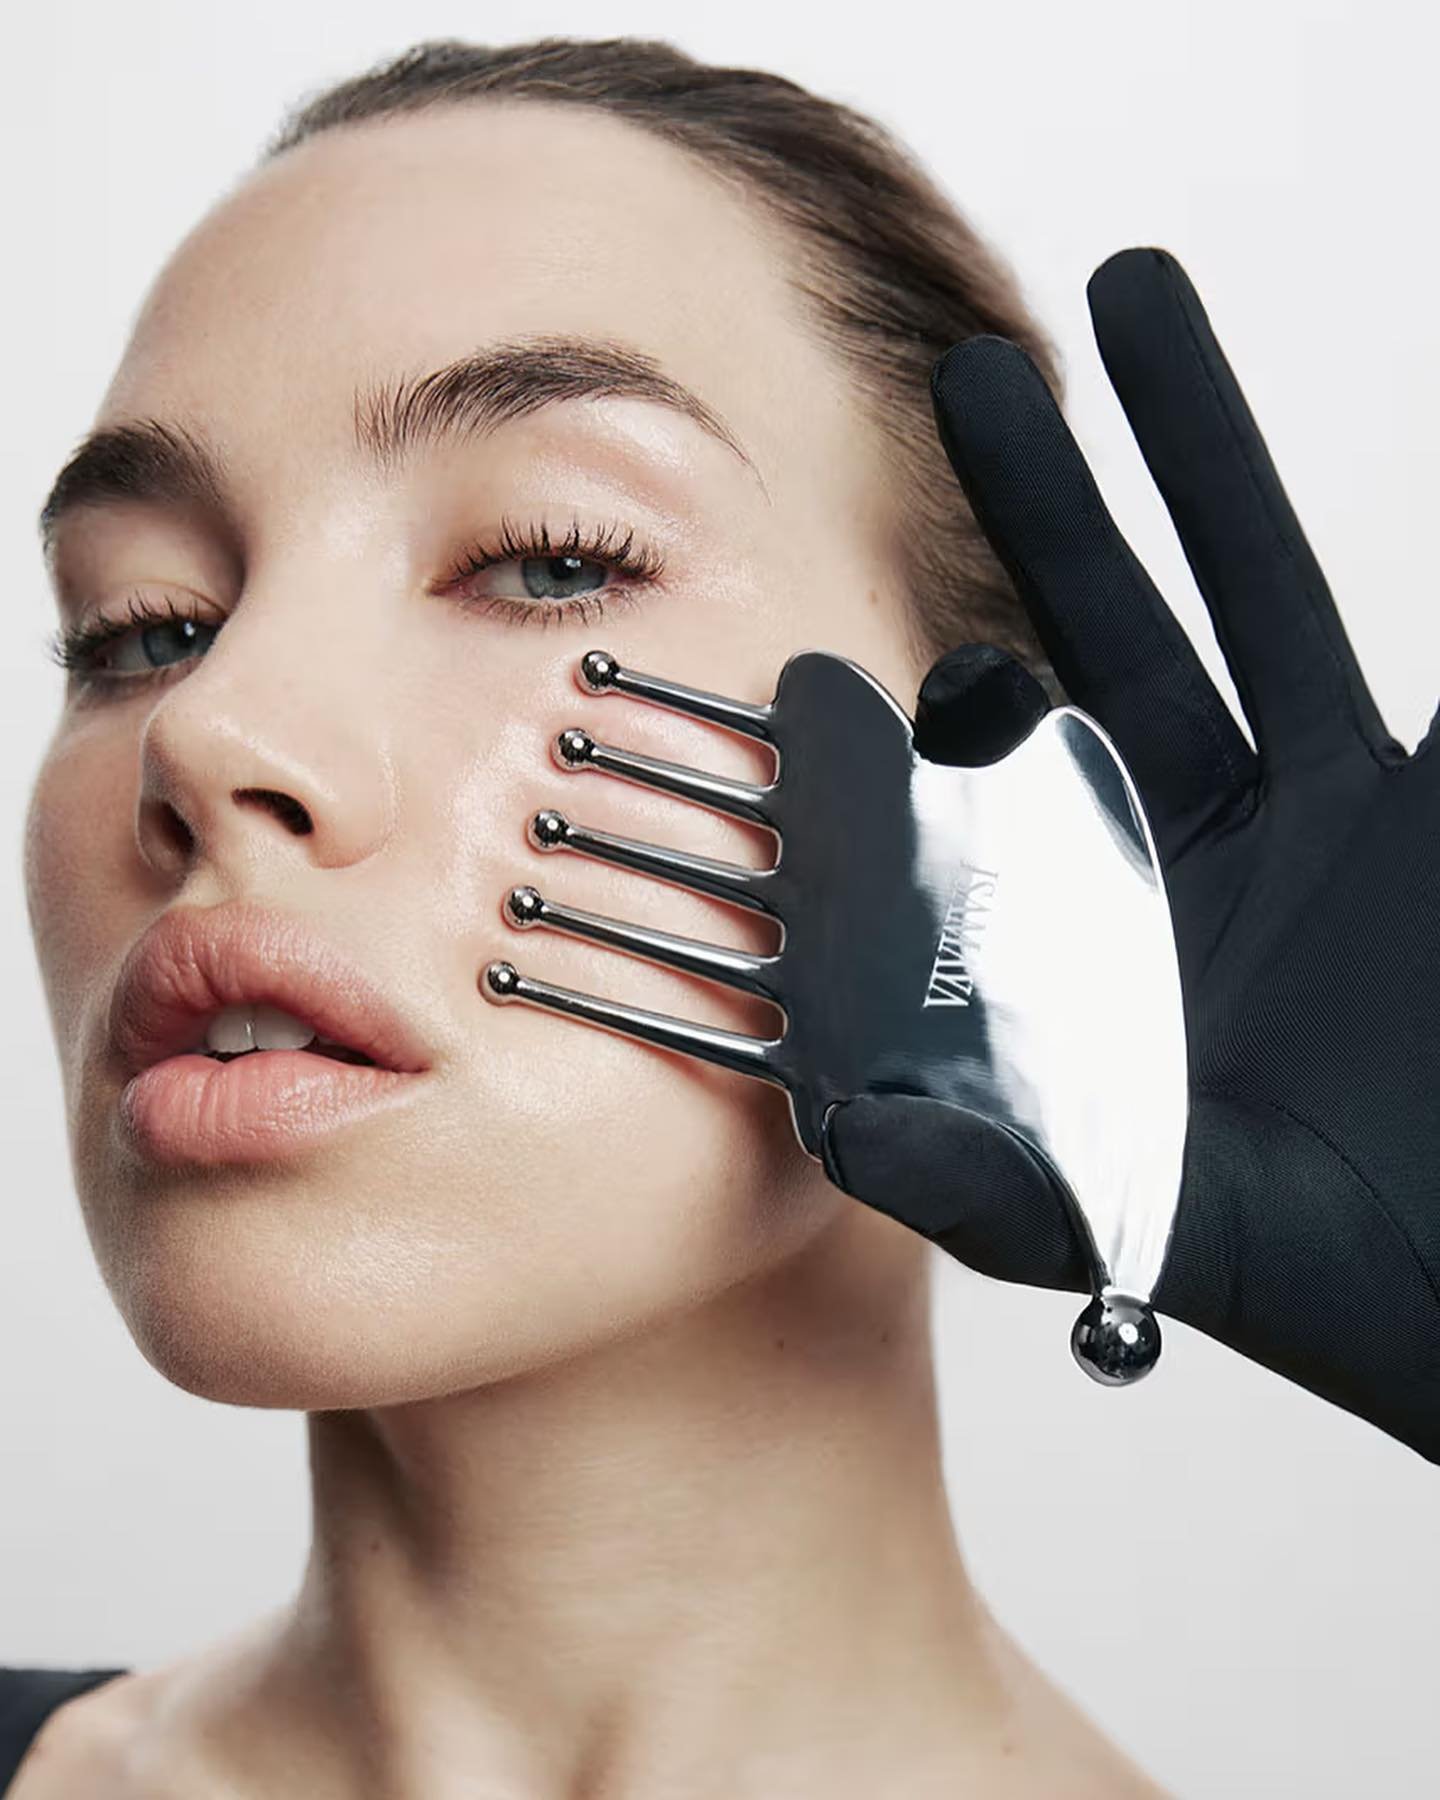 Face sculpting takes a bold leap forward with FaceGym and Isamaya Ffrench&rsquo;s disruptive collaboration. Sculpt 01 merges expert design with functionality, offering a beautifully crafted tool for face and scalp care. This launch reflects their sha